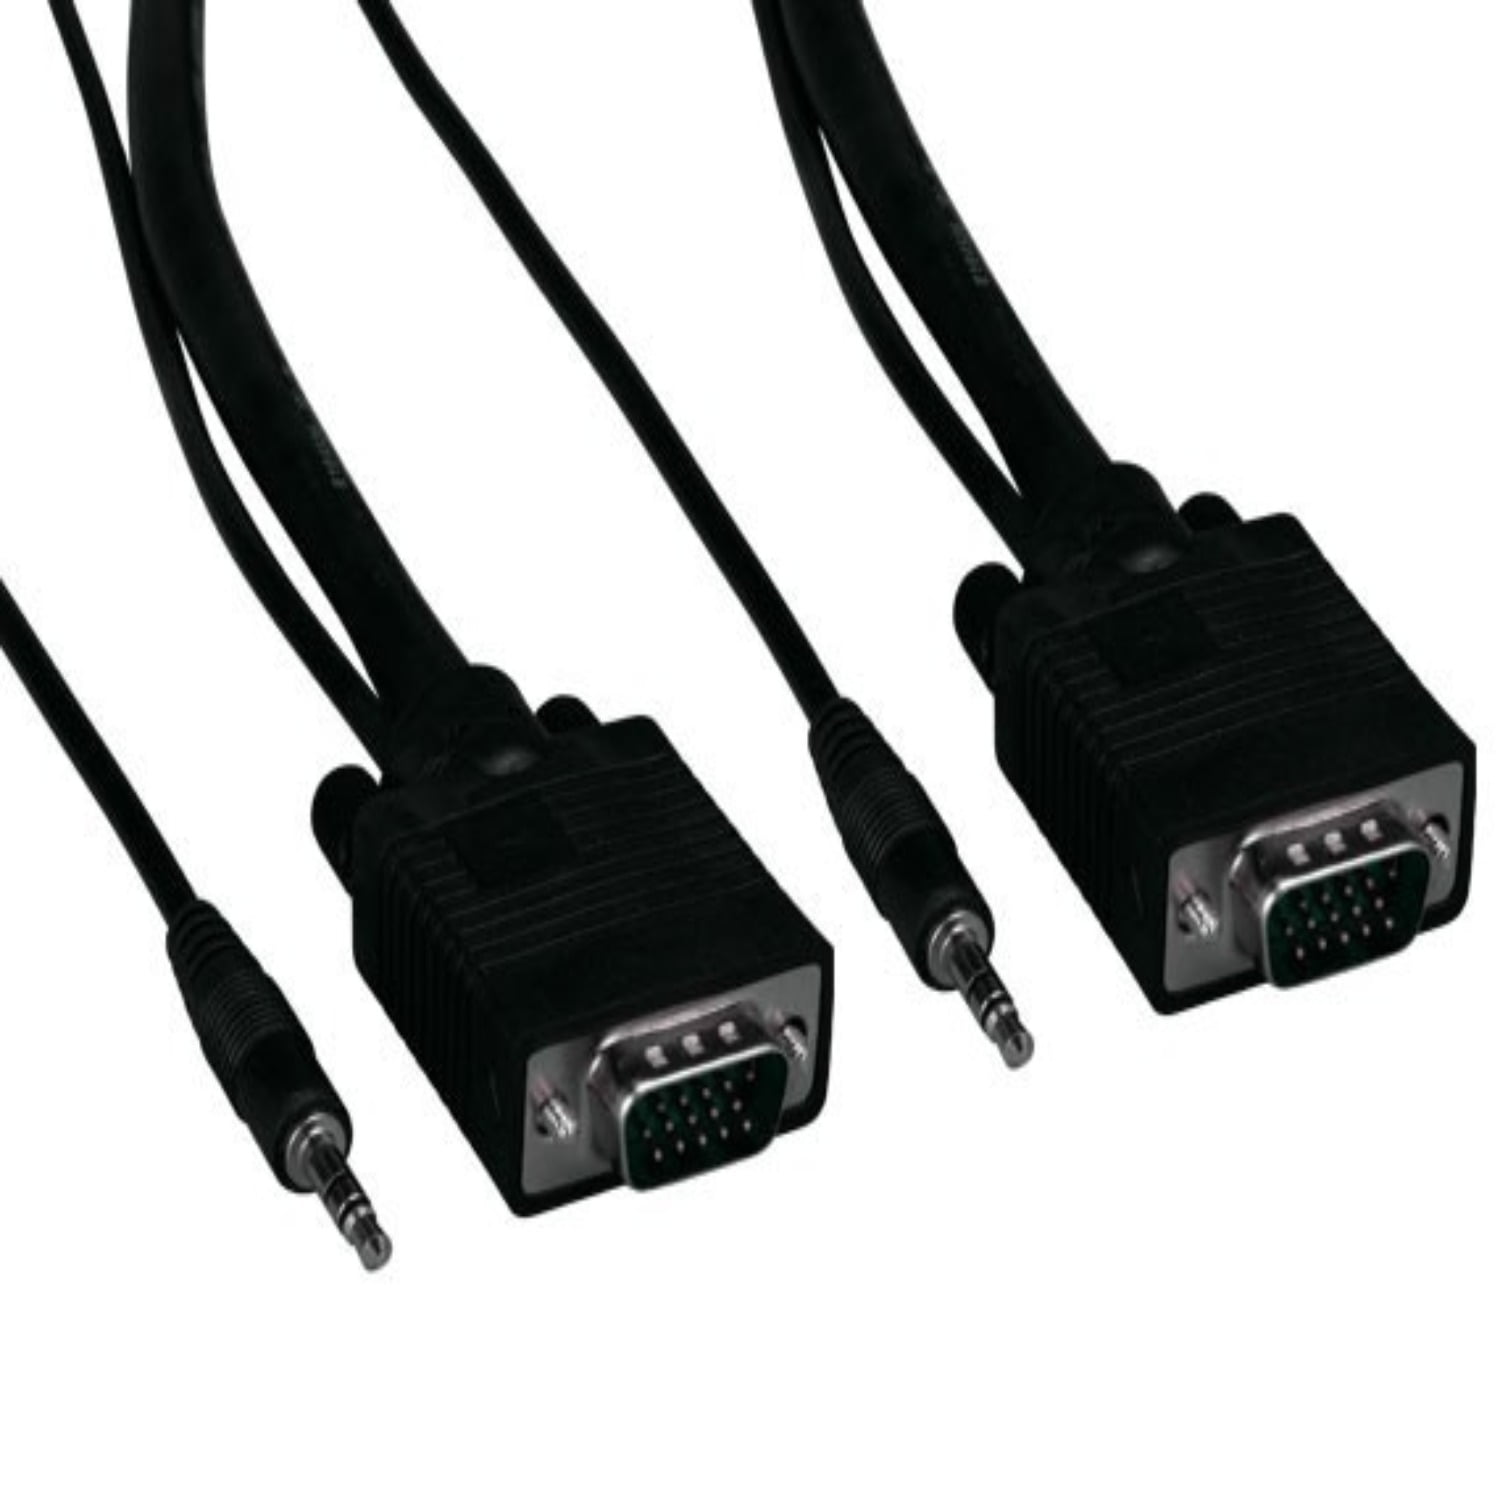 VGA SVGA Video 3.5mm Stereo Audio PC Laptop to Monitor TV 2-in-1 Cable 25ft 